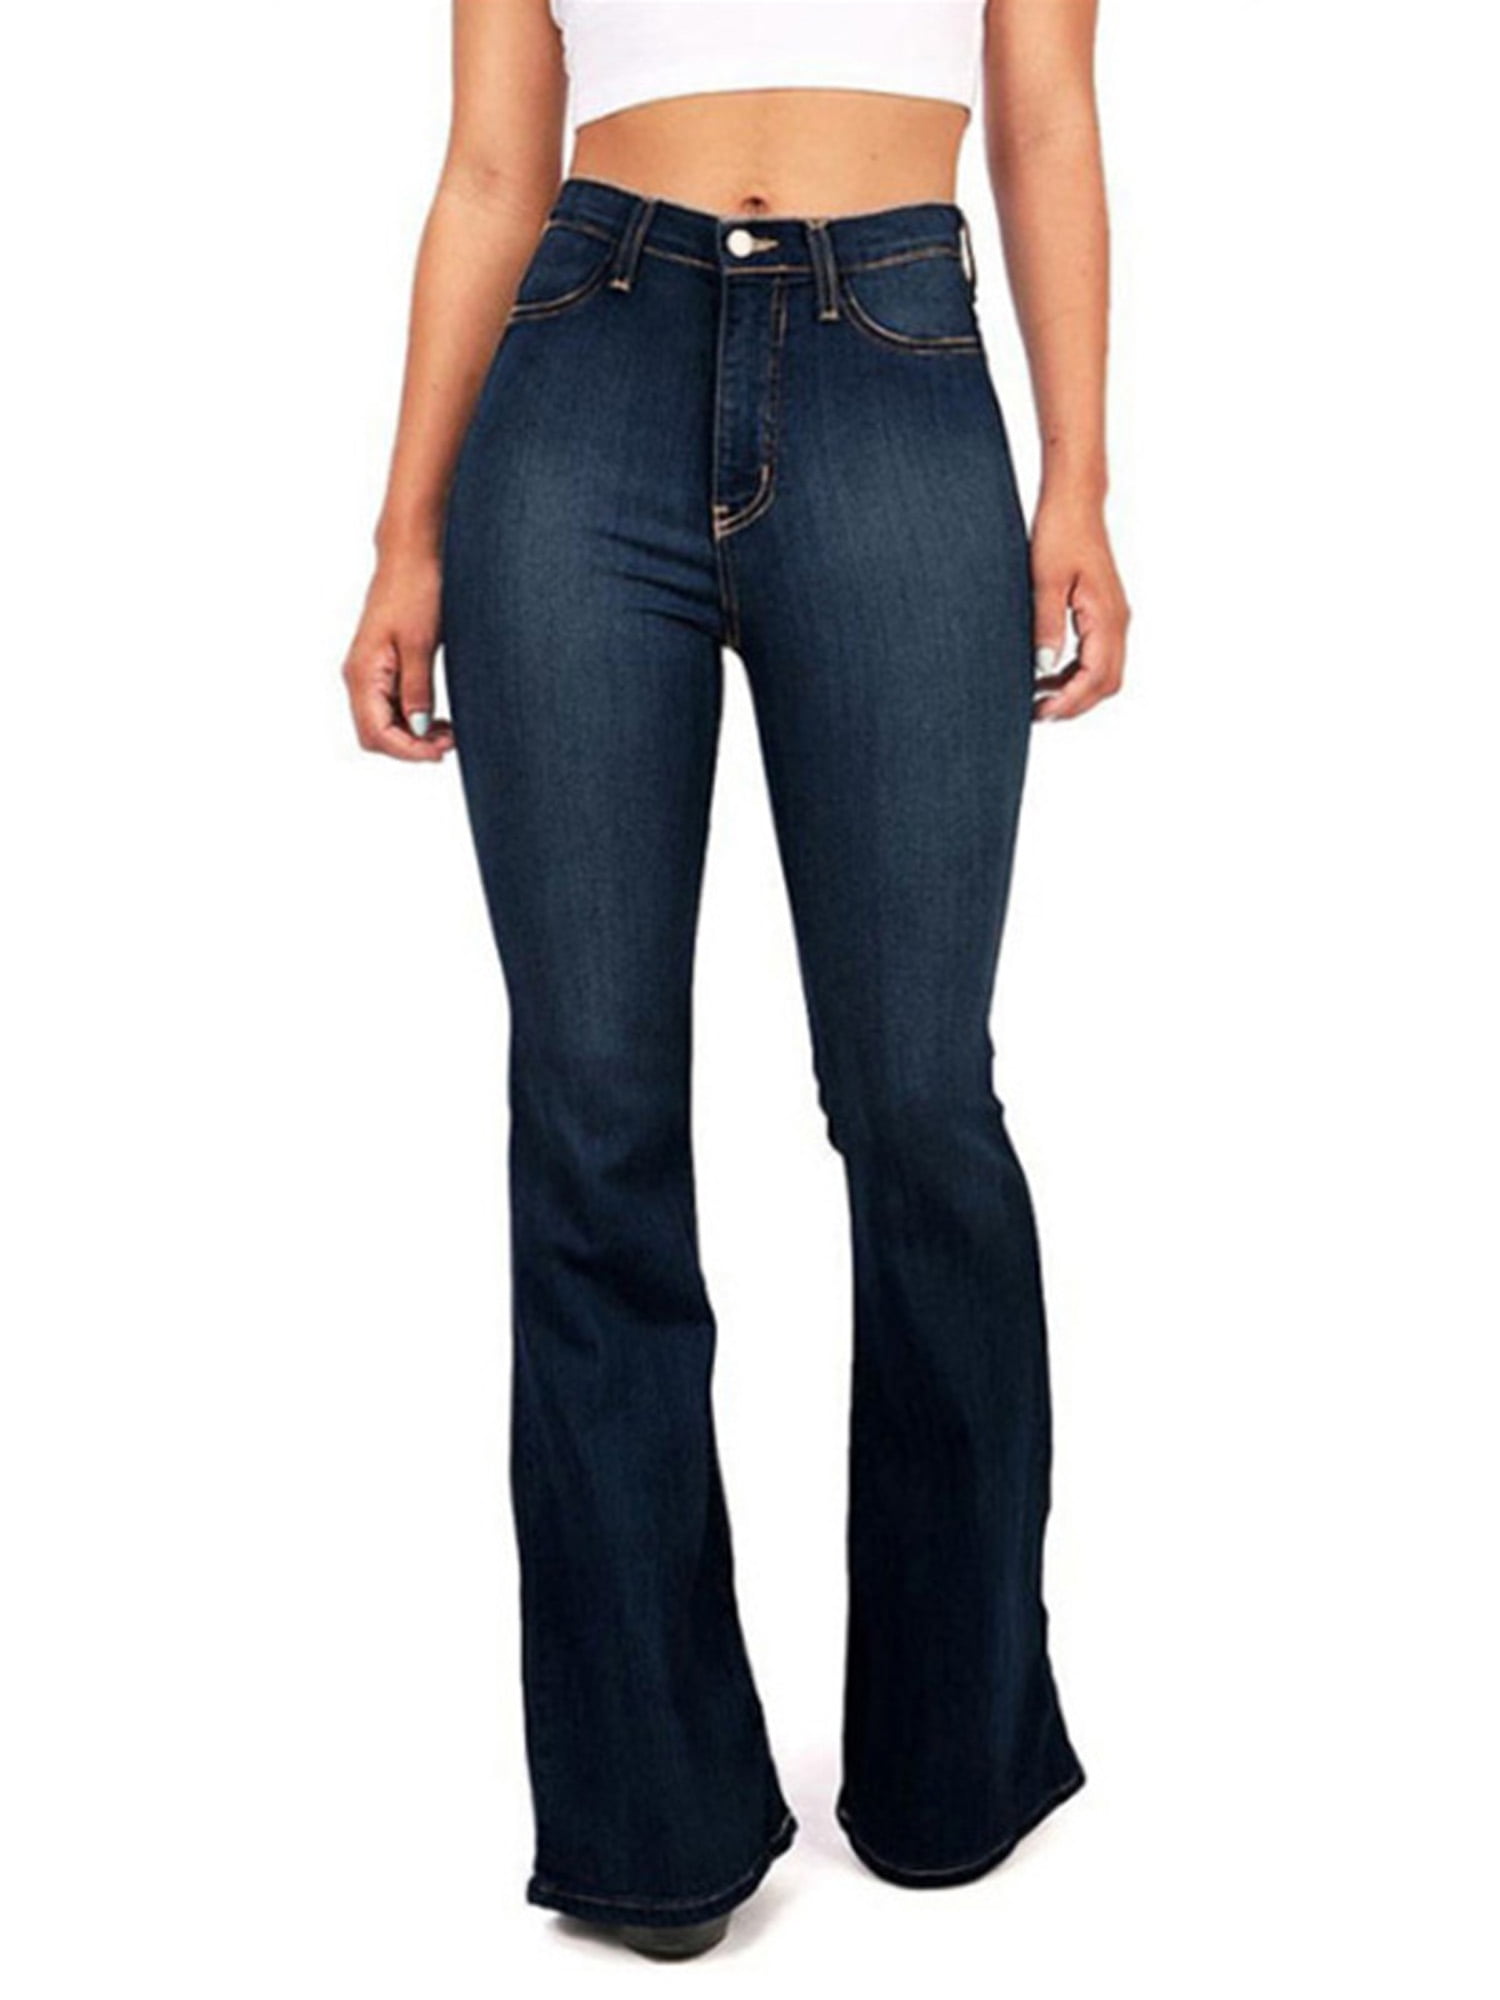 bootcut skinny jeans womens